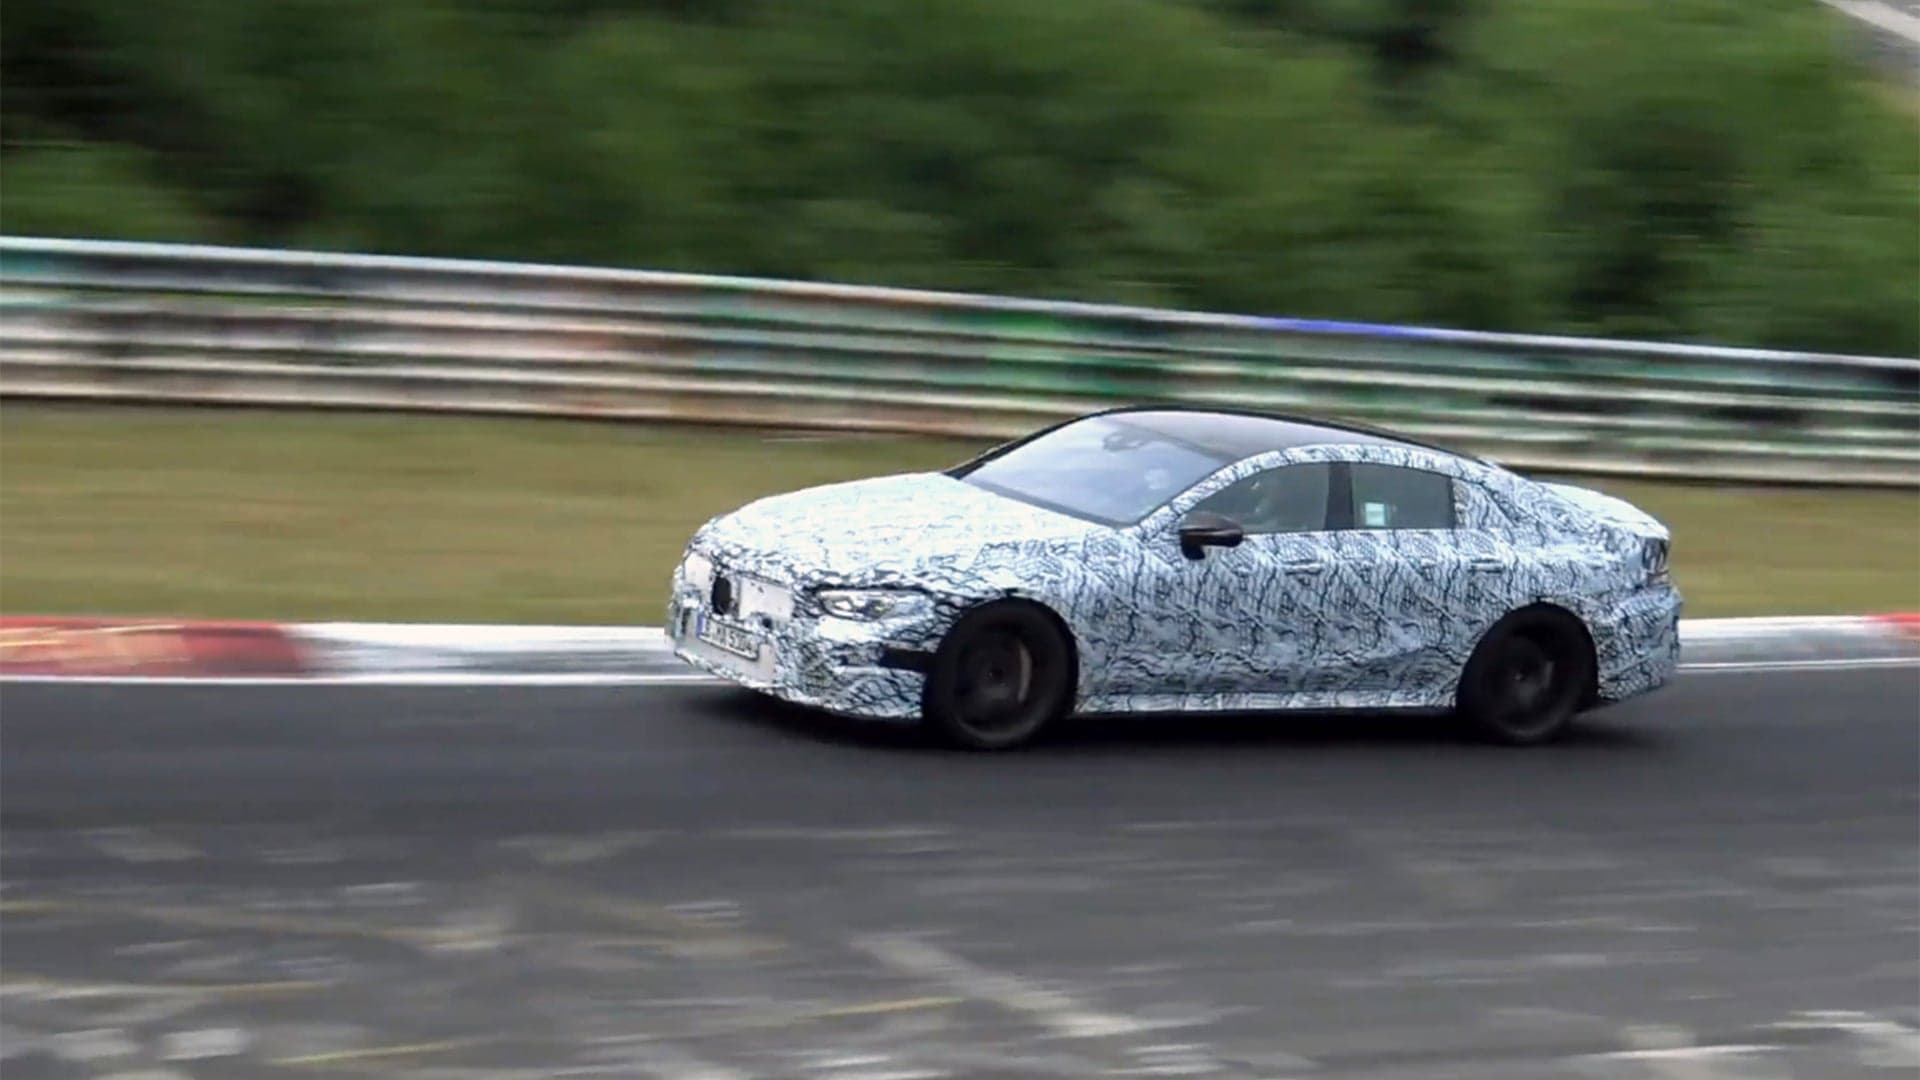 Watch the Mercedes-AMG GT Four Test at the Nurburgring